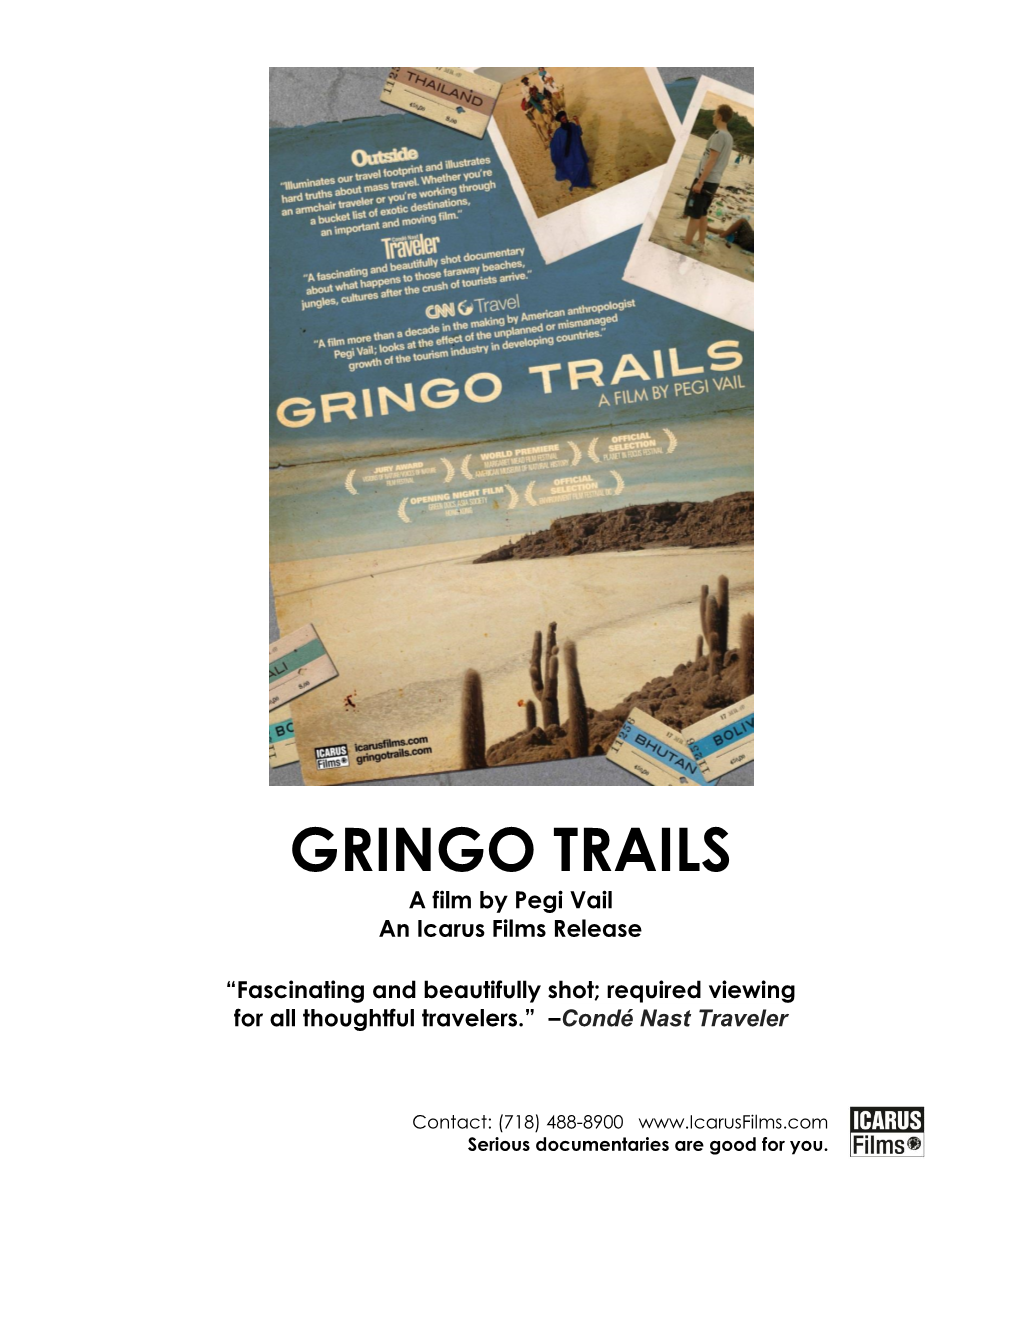 GRINGO TRAILS a Film by Pegi Vail an Icarus Films Release